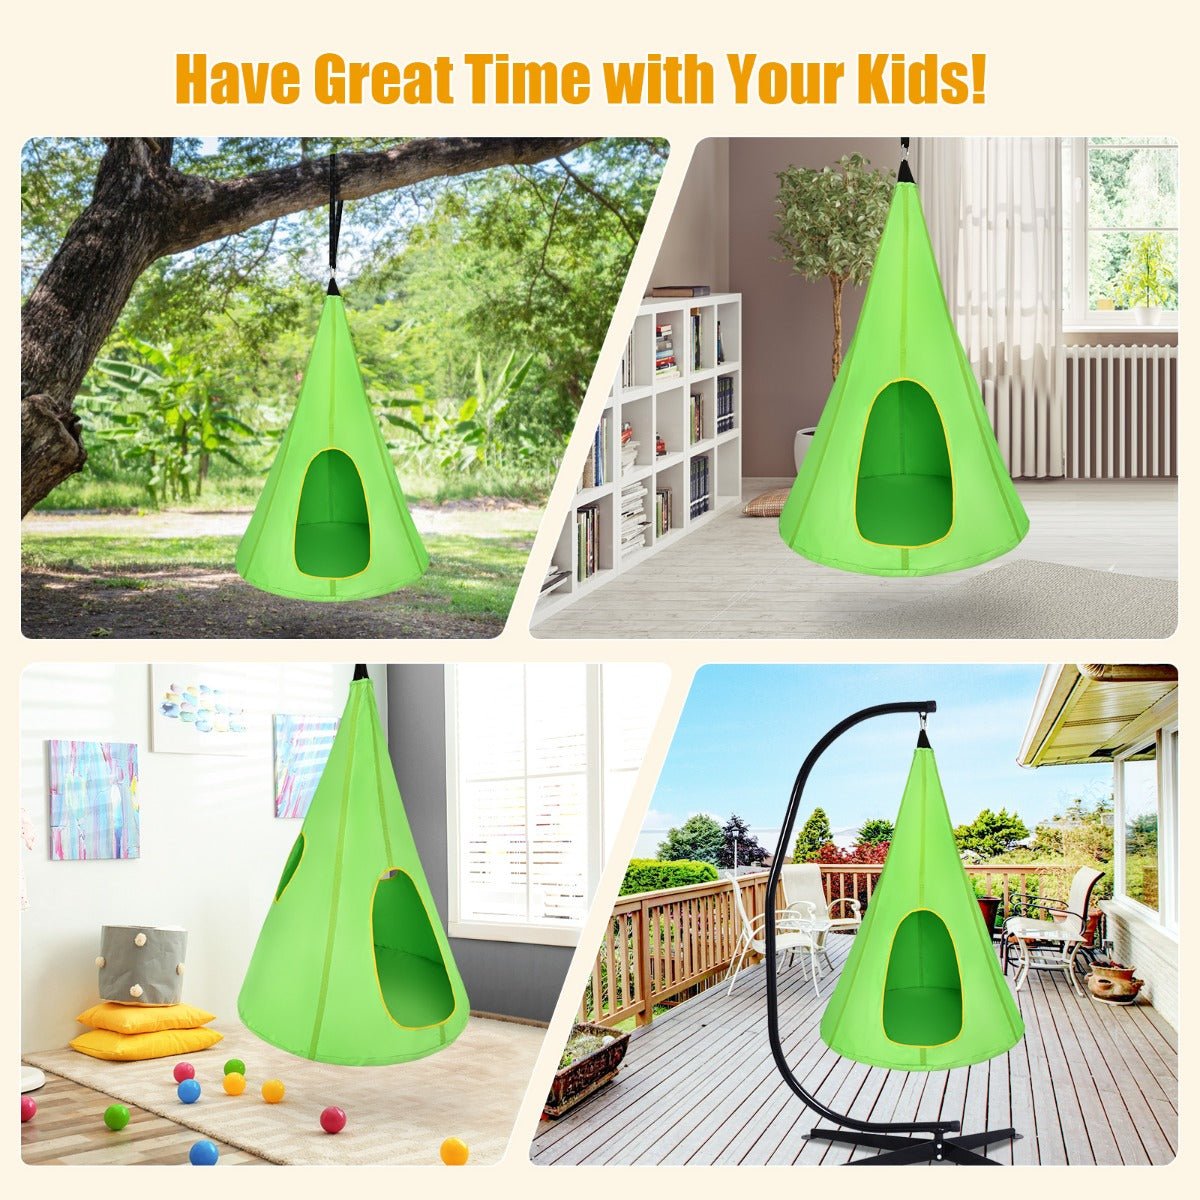 Swing into Nature: Kids Nest Swing Tent Green 80cm, Fun Amongst the Trees